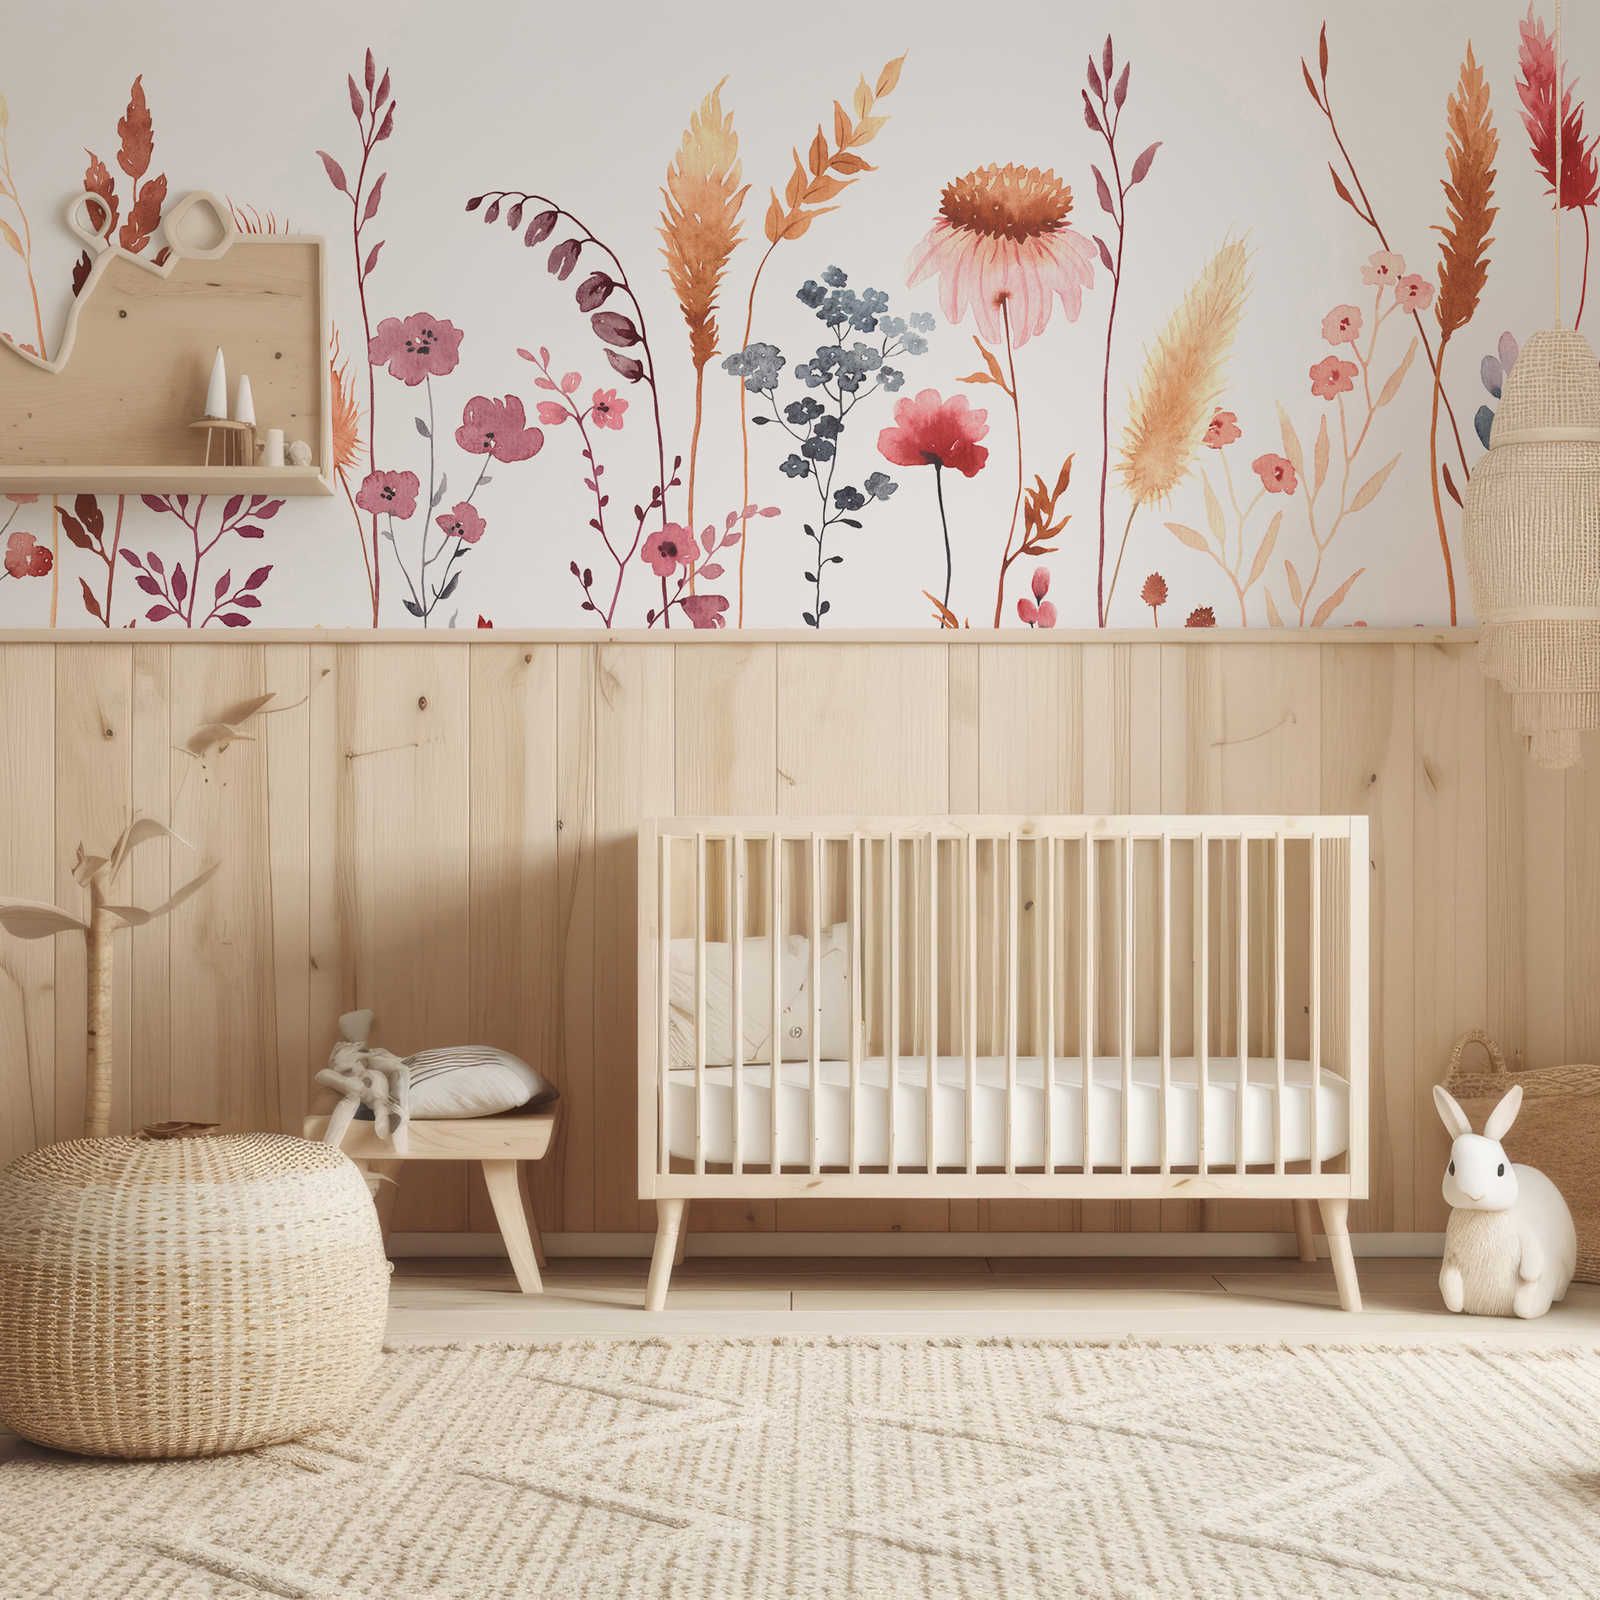 Children's Room Wallpaper with Leaves and Grasses - Textured non-woven
